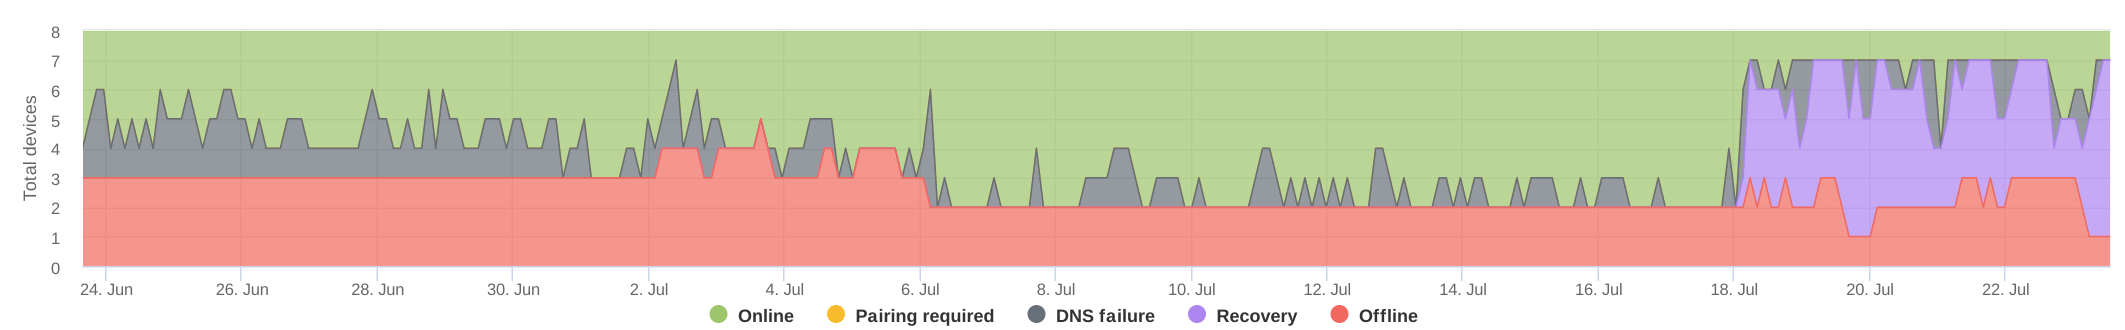 network-outages.png